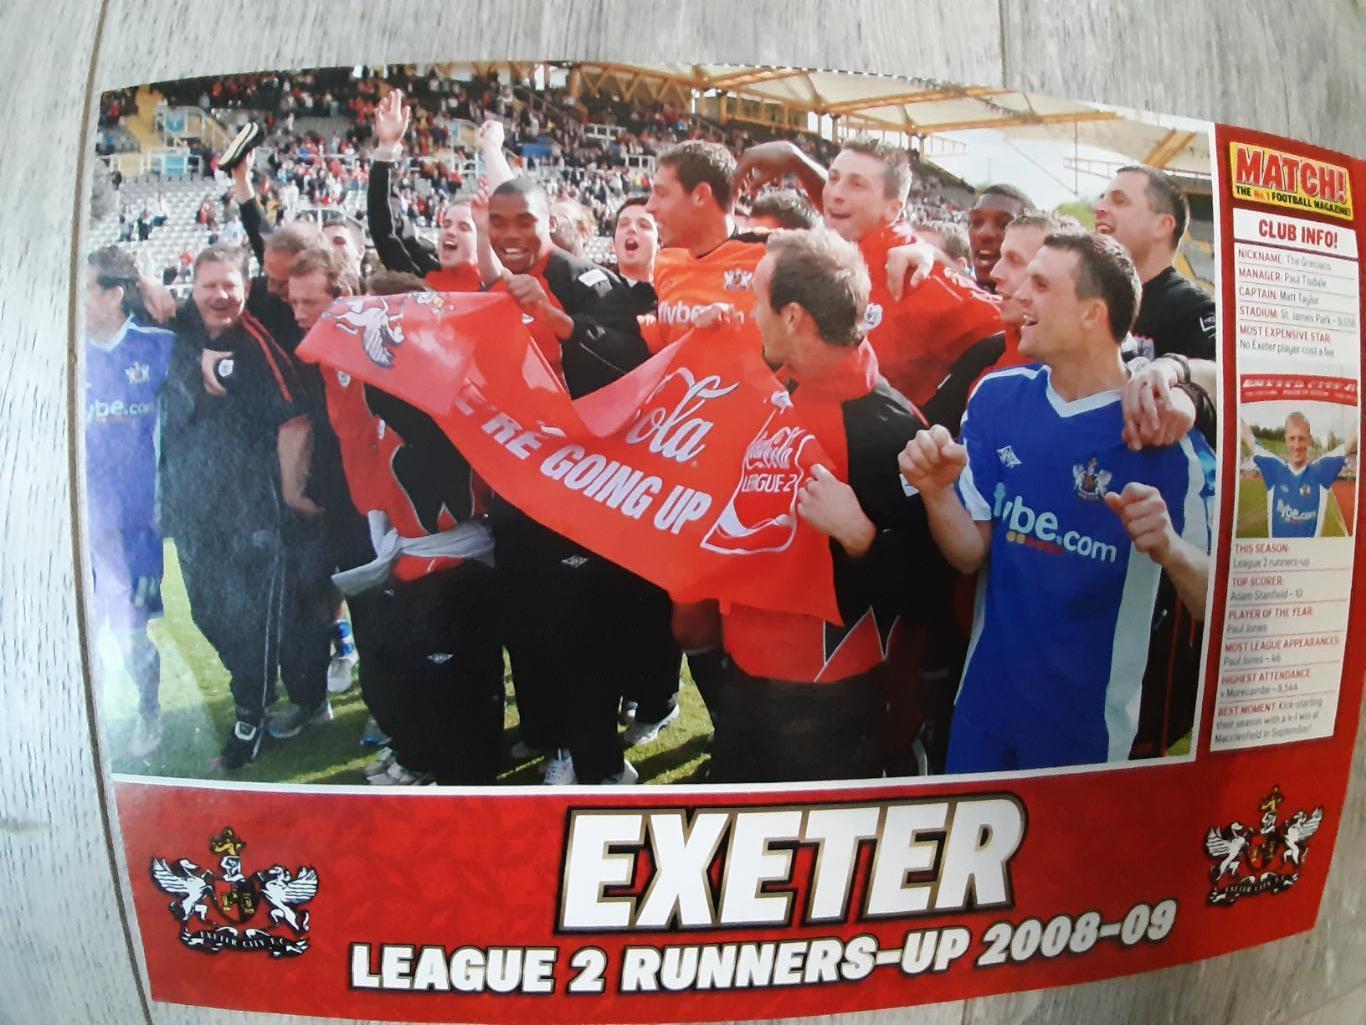 WYCOMBE, EXETER.2008/09 1